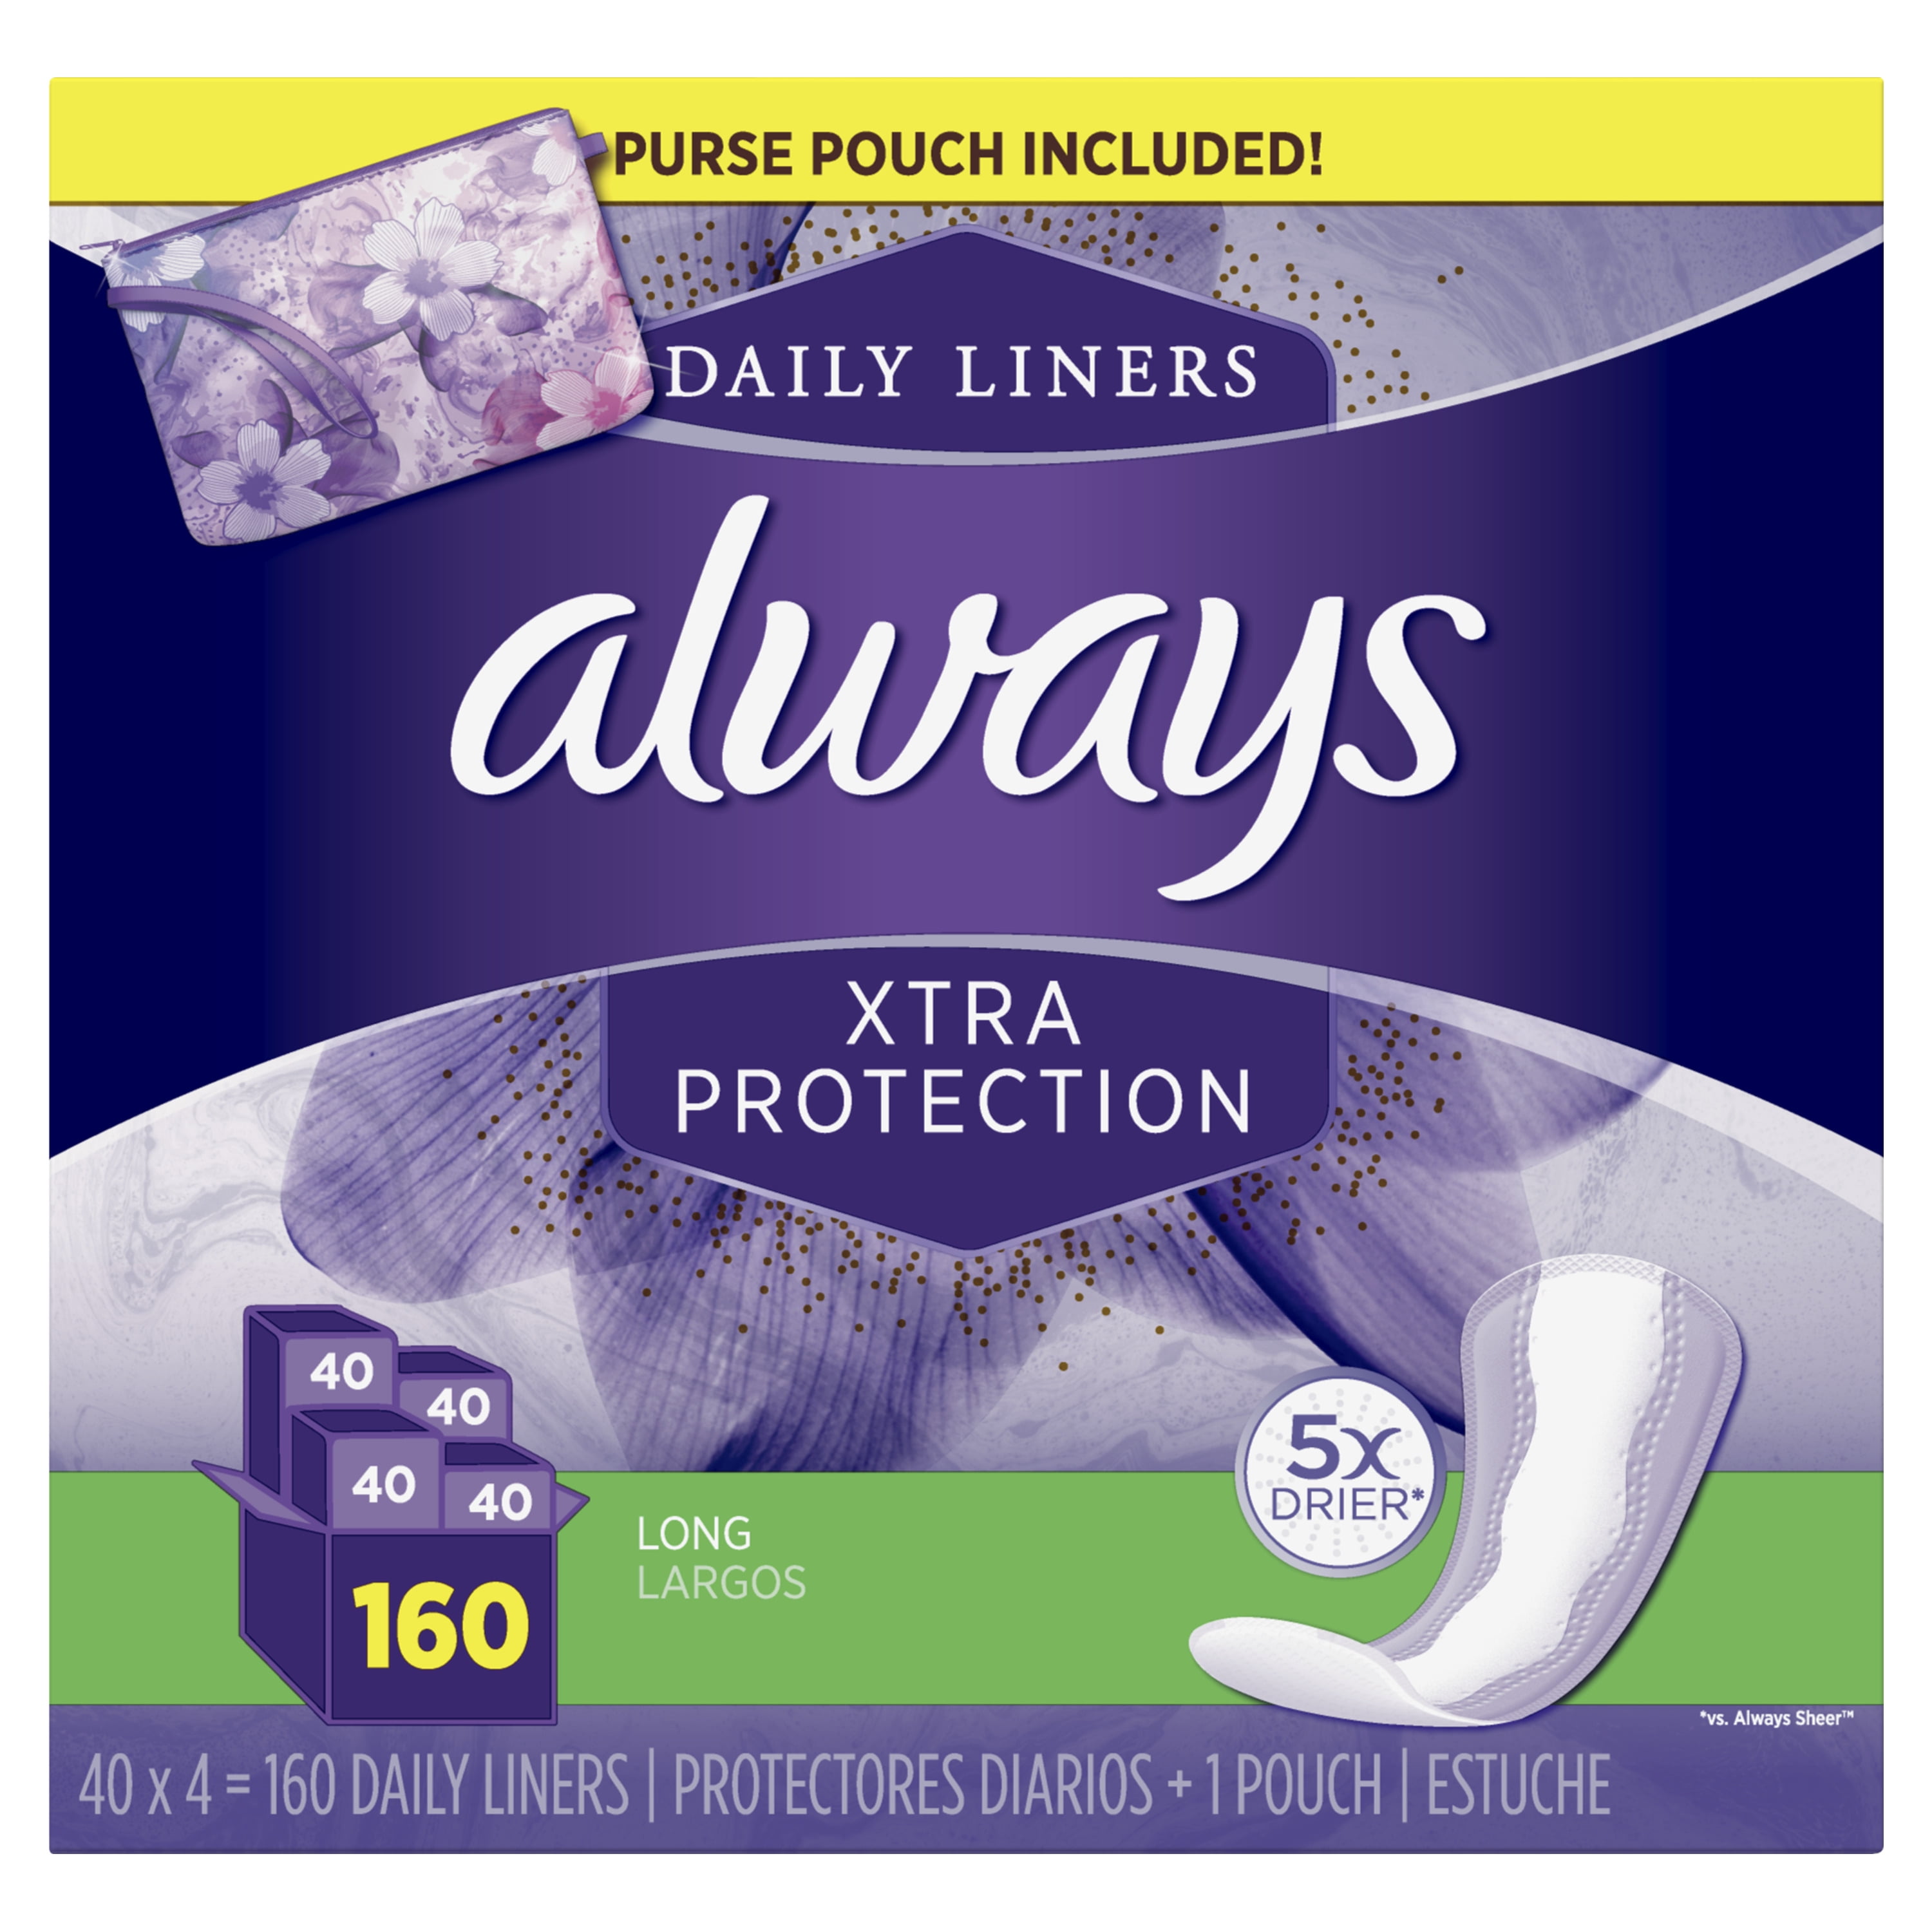 Always Ultra Thin, Feminine Pads For Women, Size 1 Regular Absorbency, With  Wings, Unscented, 46 Count